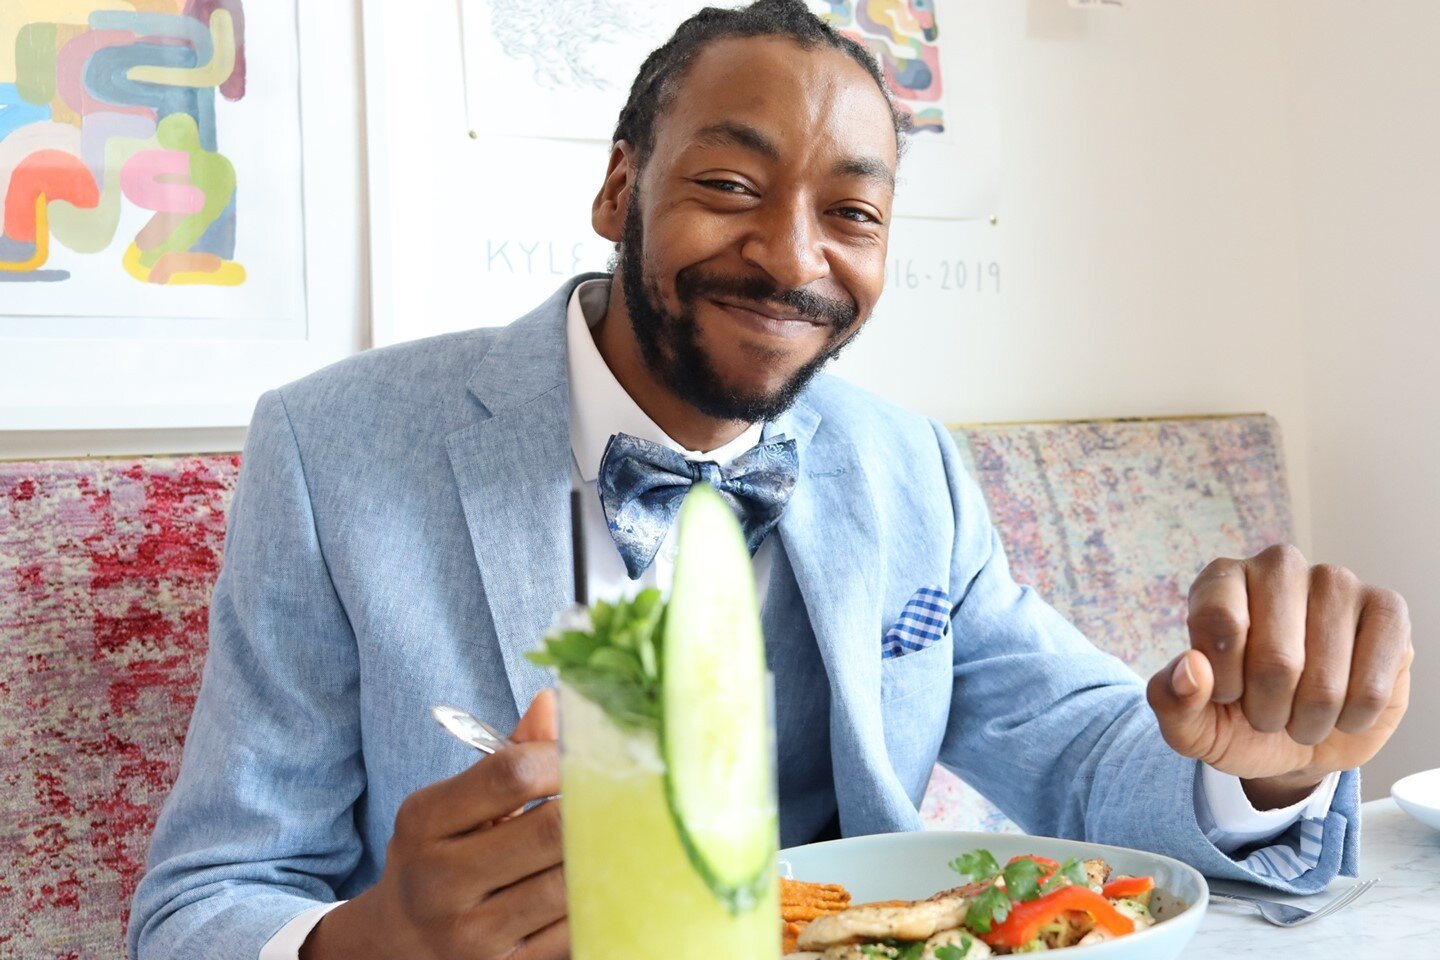 Meet our sweet manager Ed, looking super dapper while enjoying lunch with a side of our gloriously refreshing Same Same But Different cocktail 😍